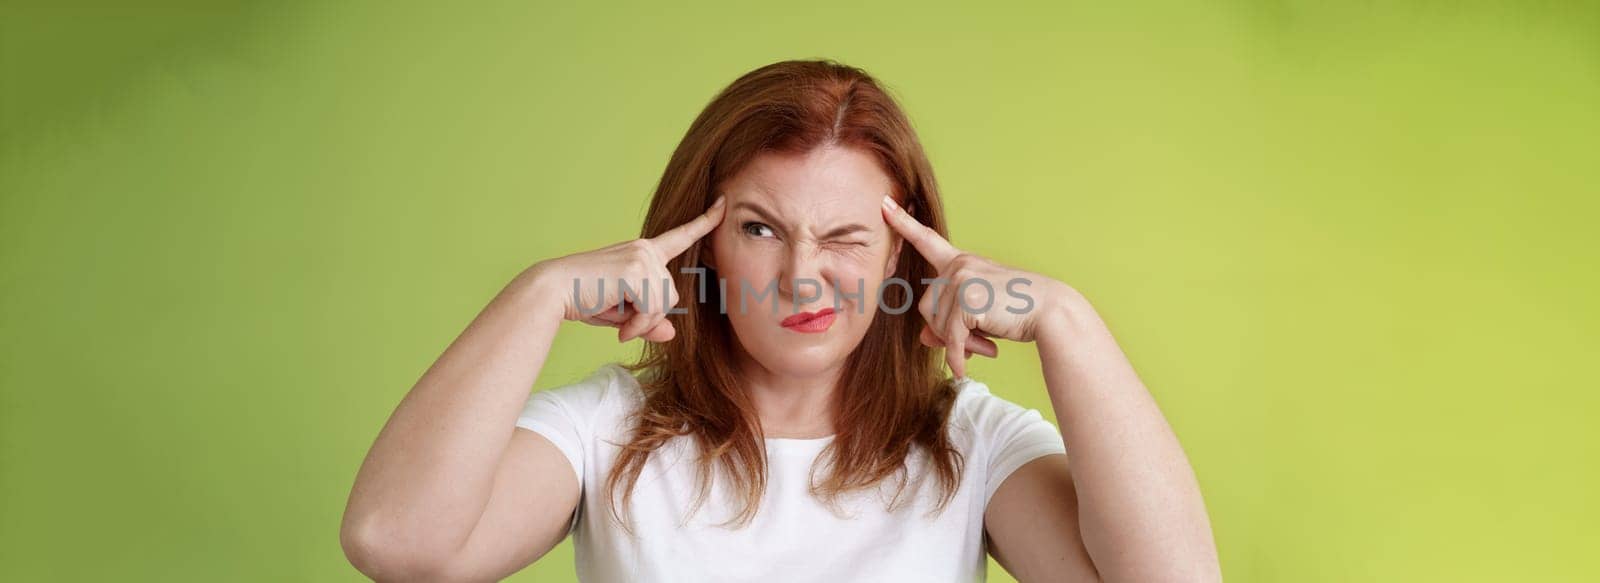 Difficult decision. Perplexed hesitant redhead middle-aged 50s woman trying solve puzzle look puzzled troubled smirk close eyes peek right touch temples thoughtful thinking intense green background.